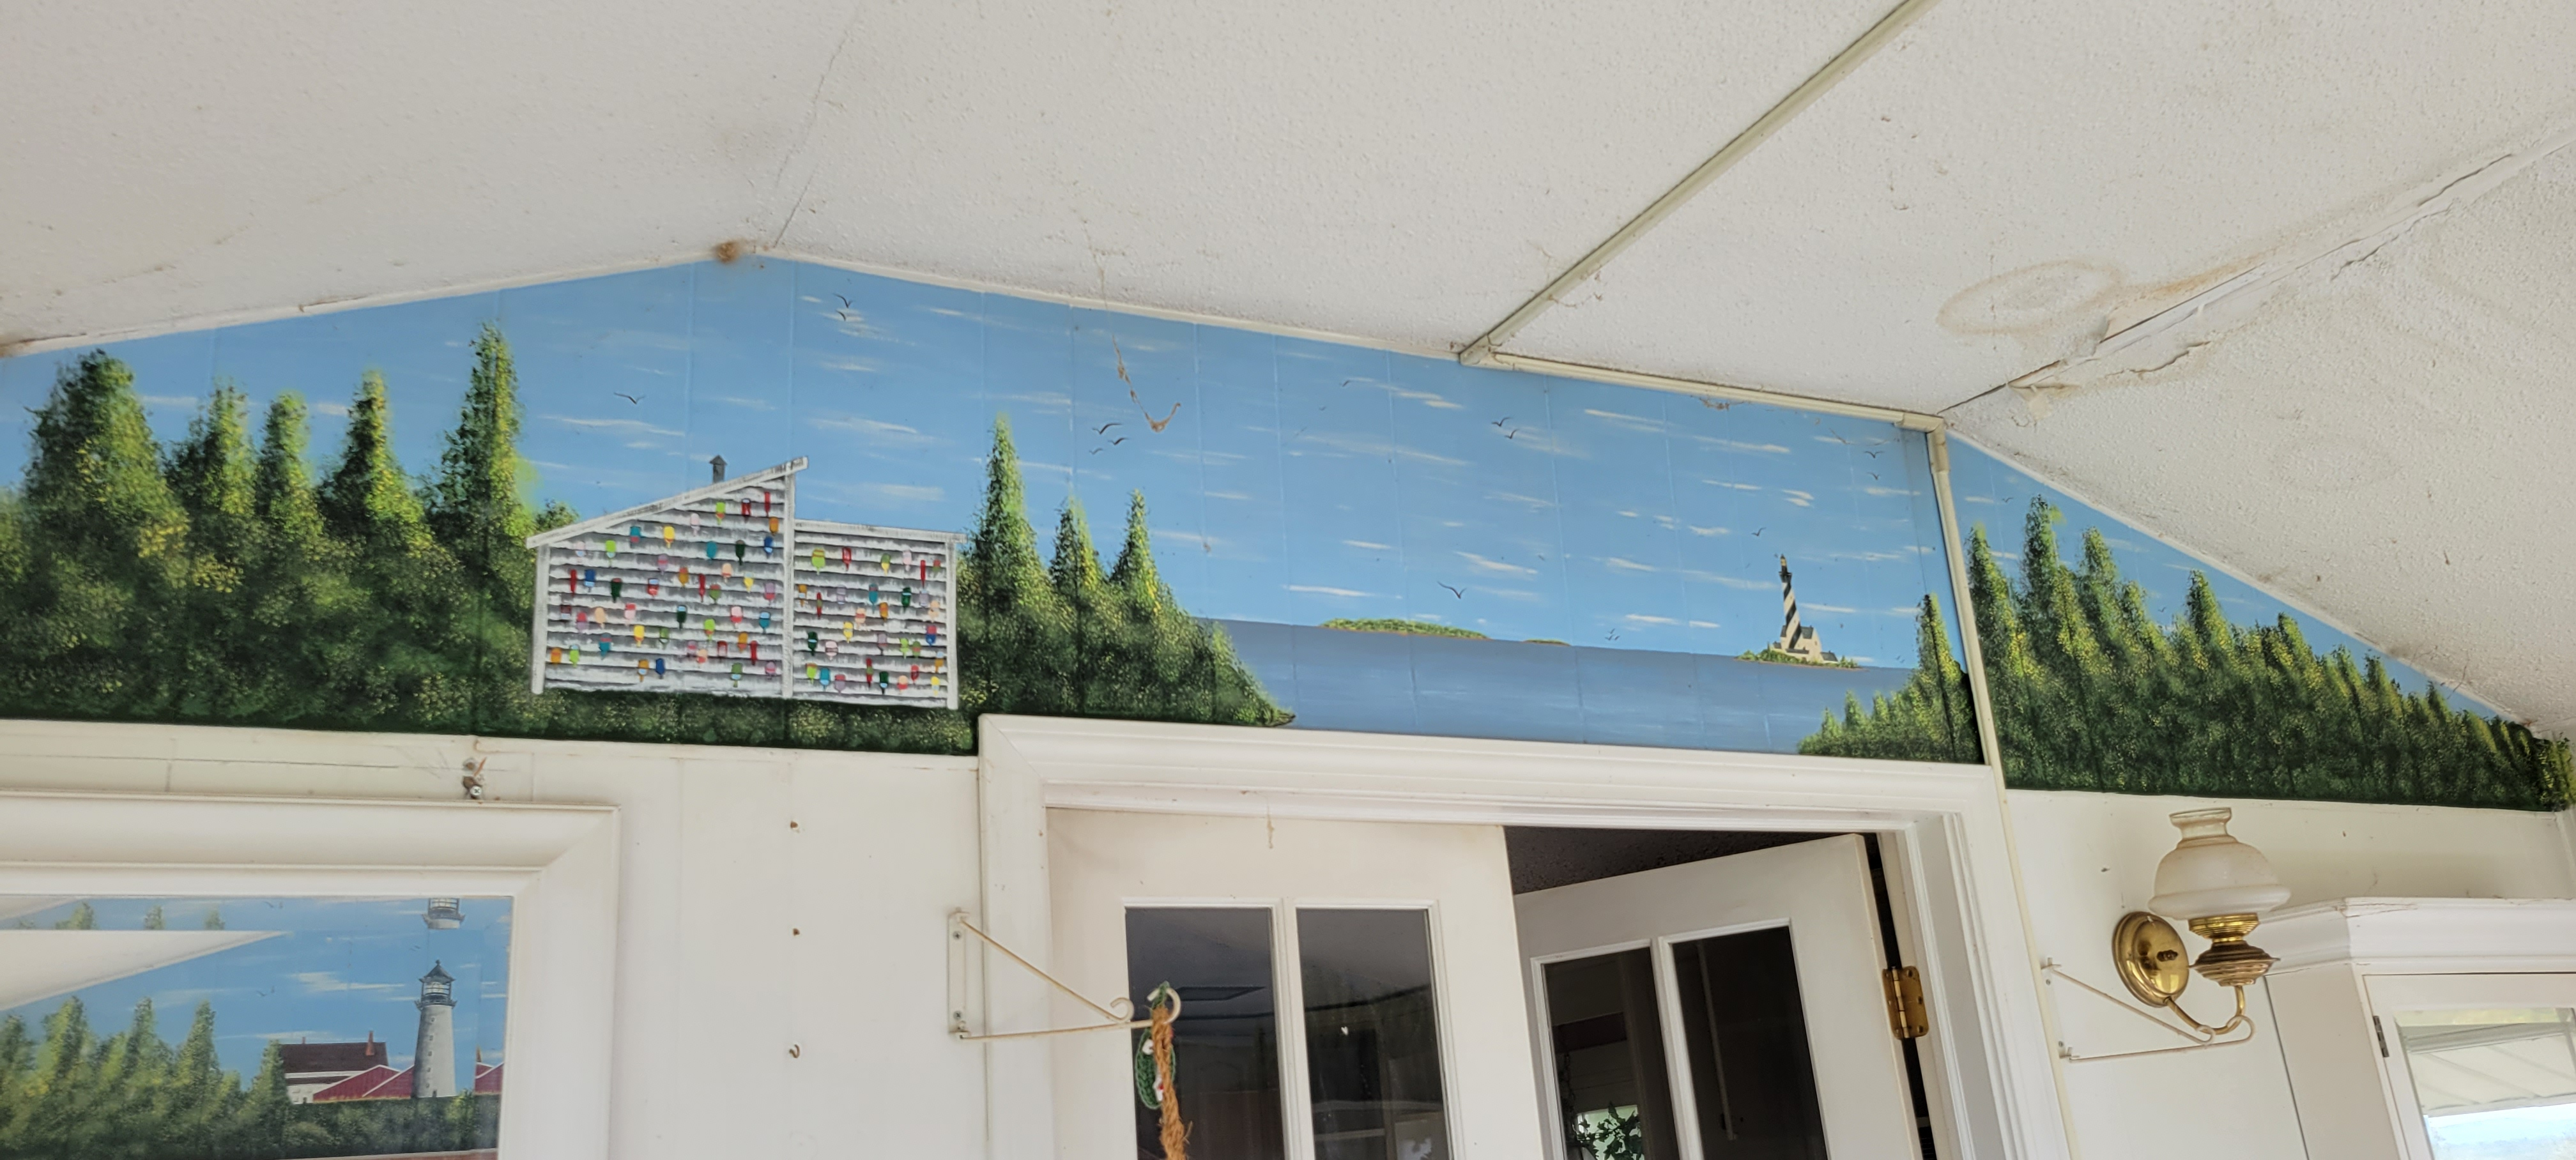 This is one of several murals that Tina Pesce painted on the walls of her home in Stockton Springs, Maine. 